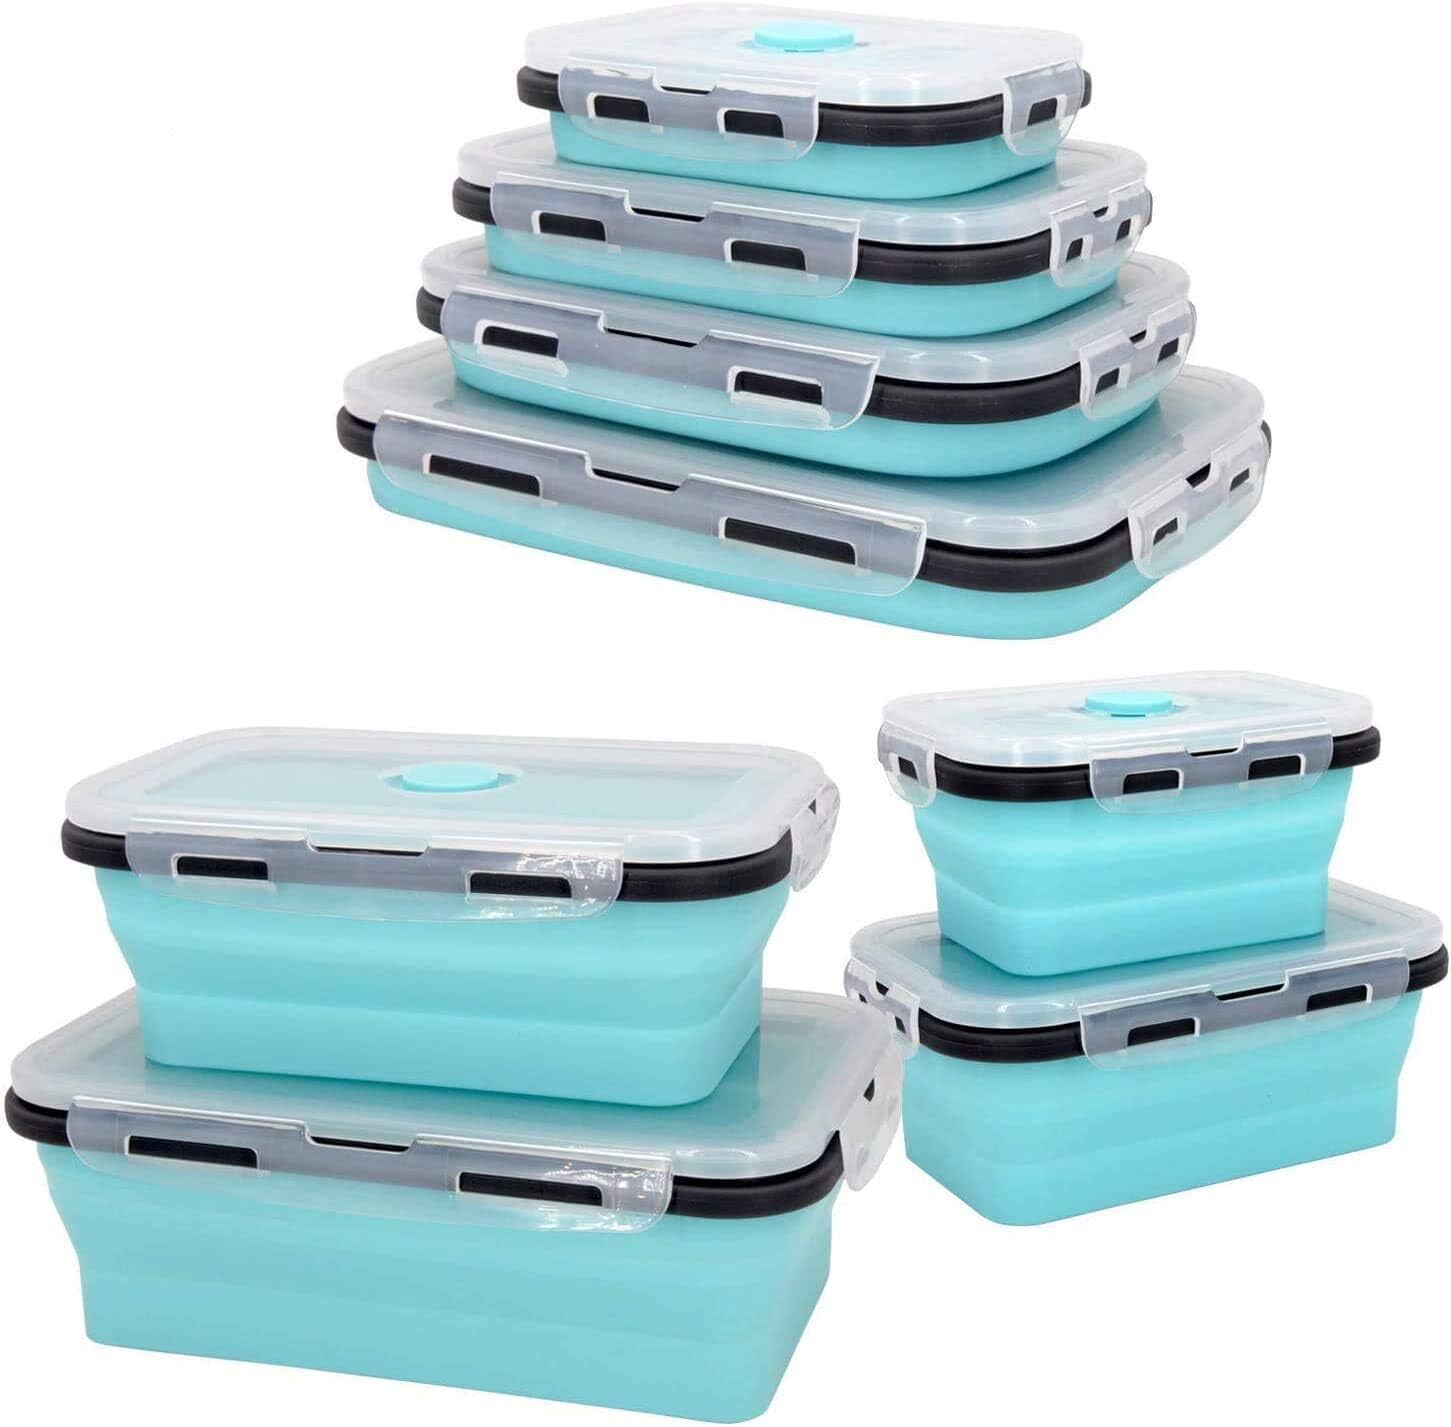 4 X Collapsible Silicone Food Storage Containers Lunchboxes Bowls Meal Box with Airtight Lid (Blue)